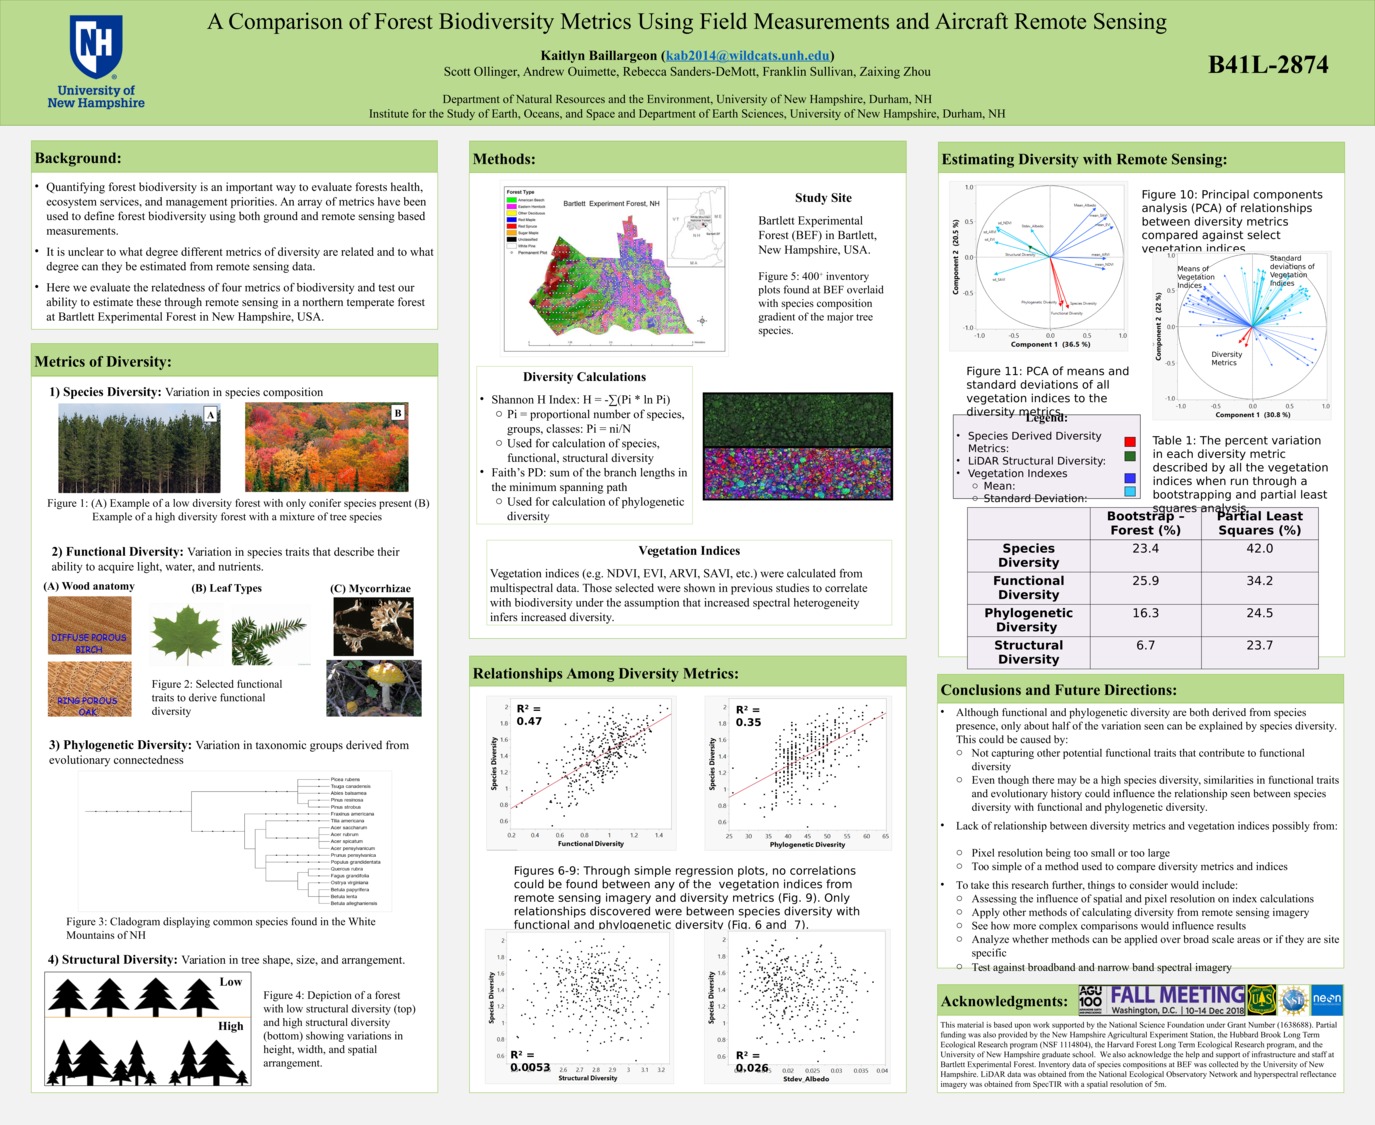 A Comparison Of Forest Biodiversity Metrics Using Field Measurements And Aircraft Remote Sensing by kab2014